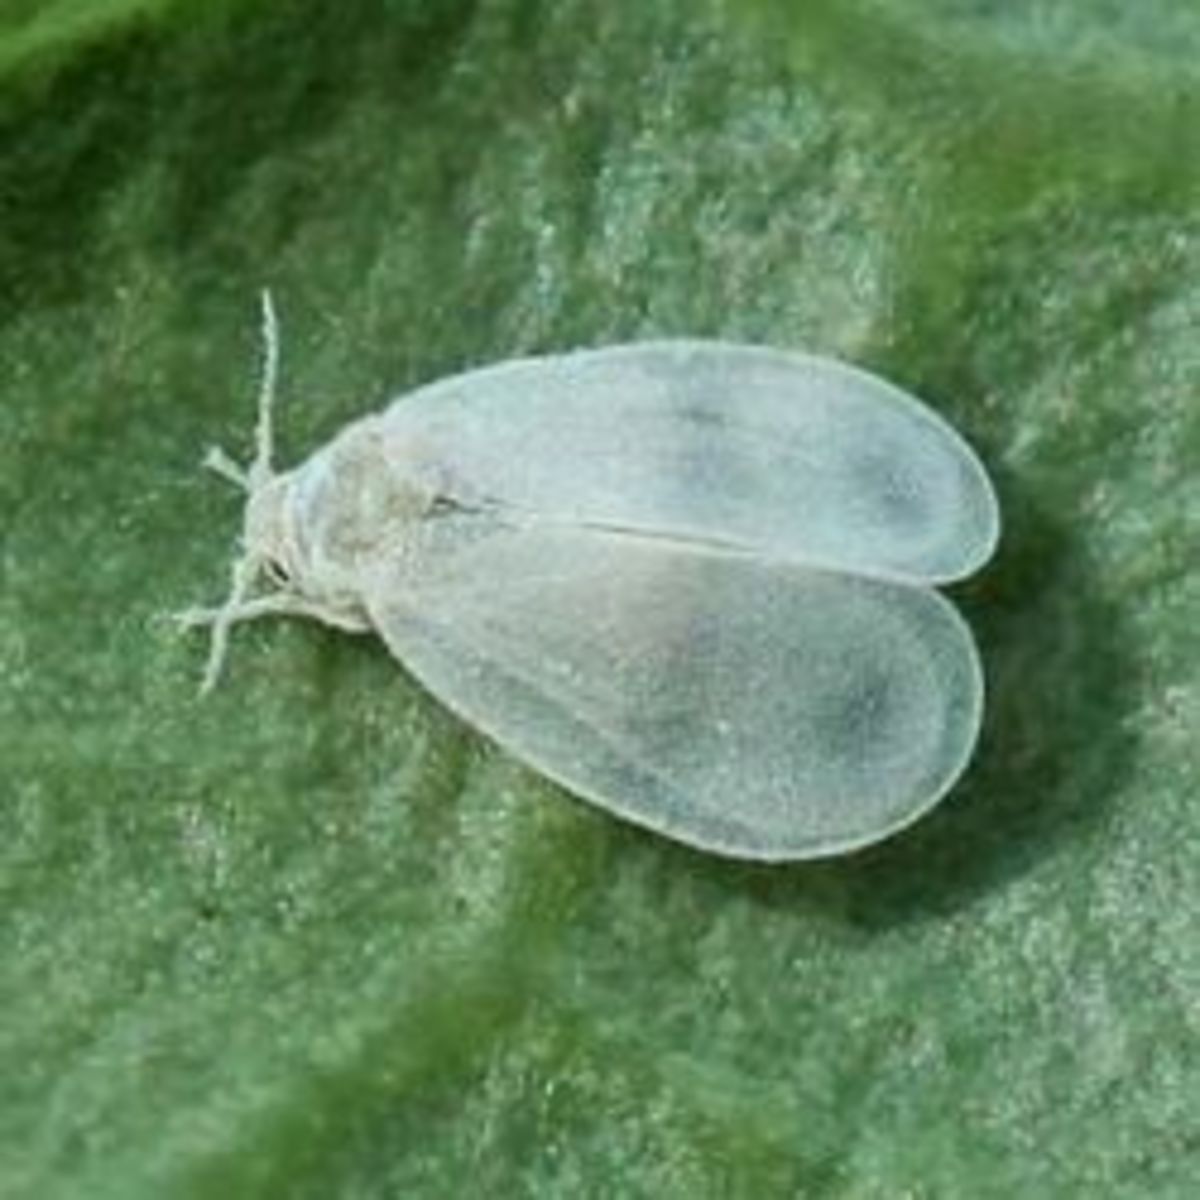 Biological Control of the Cabbage Whitefly